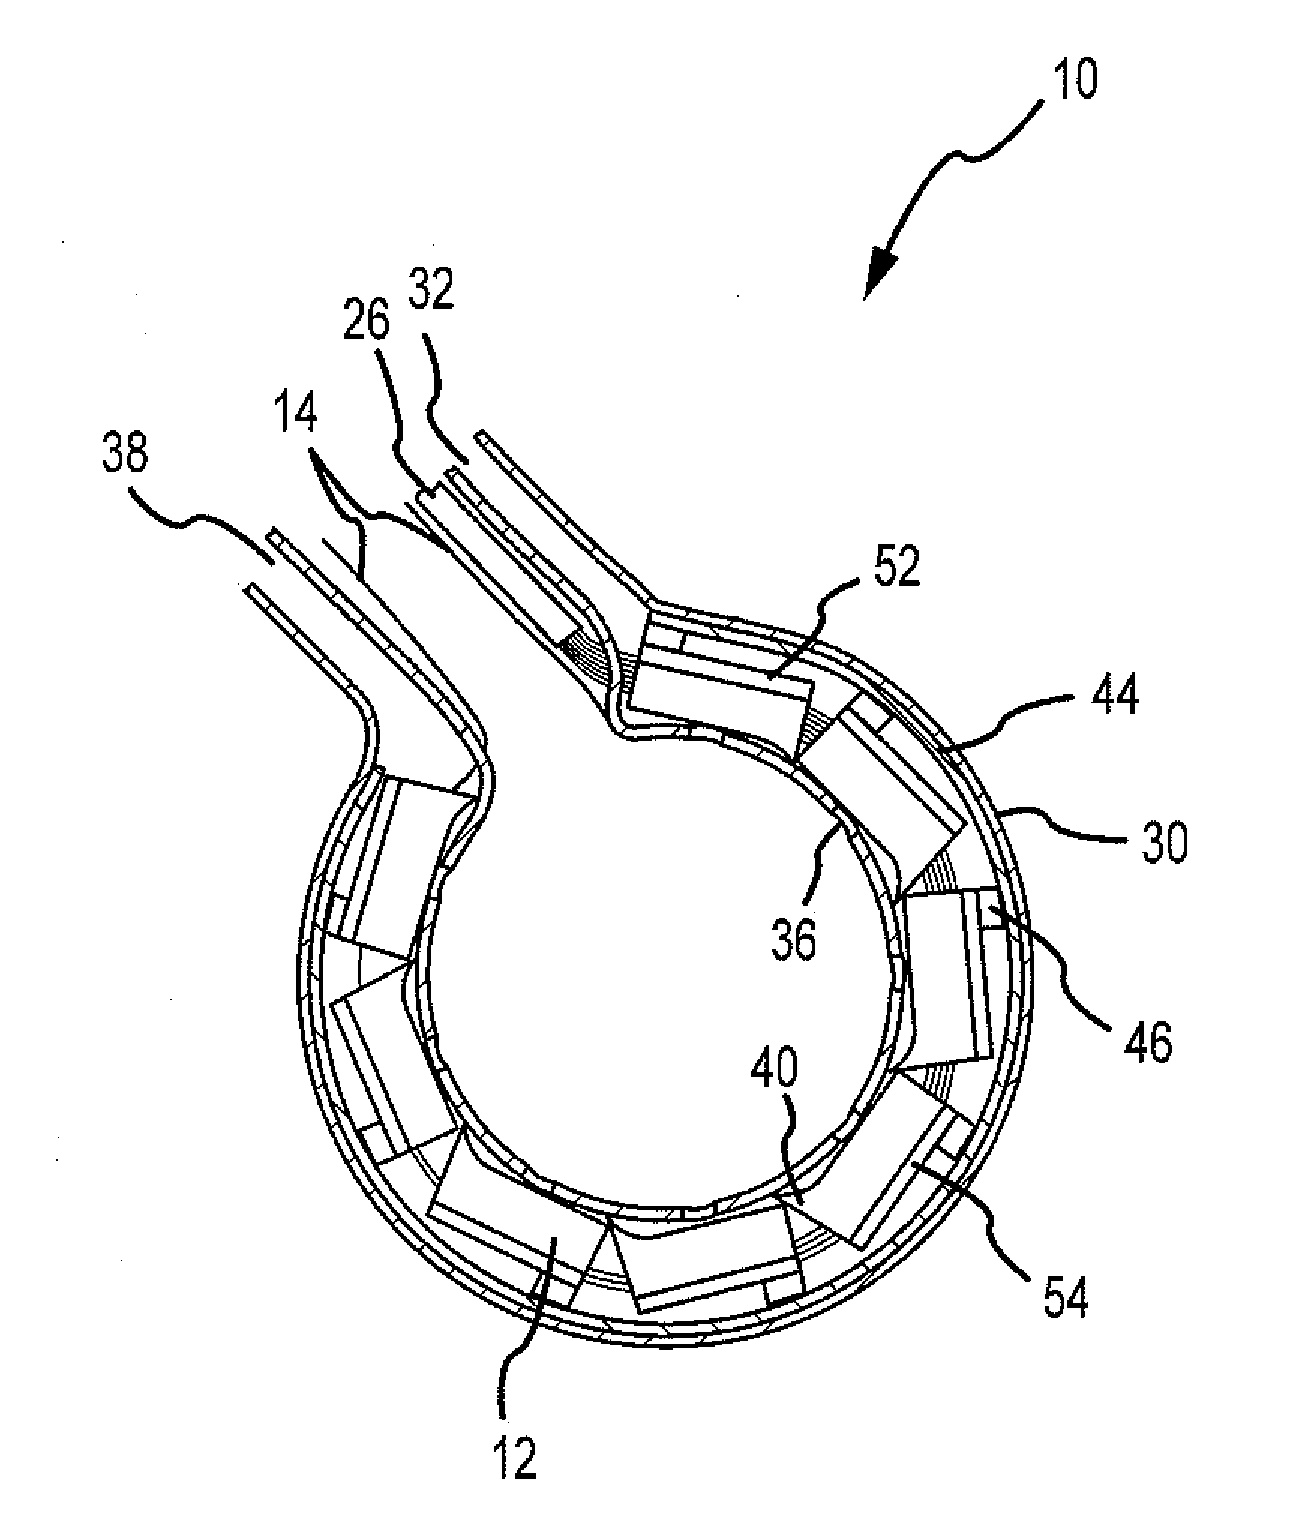 Apparatus and method for cooling and moving ablation elements